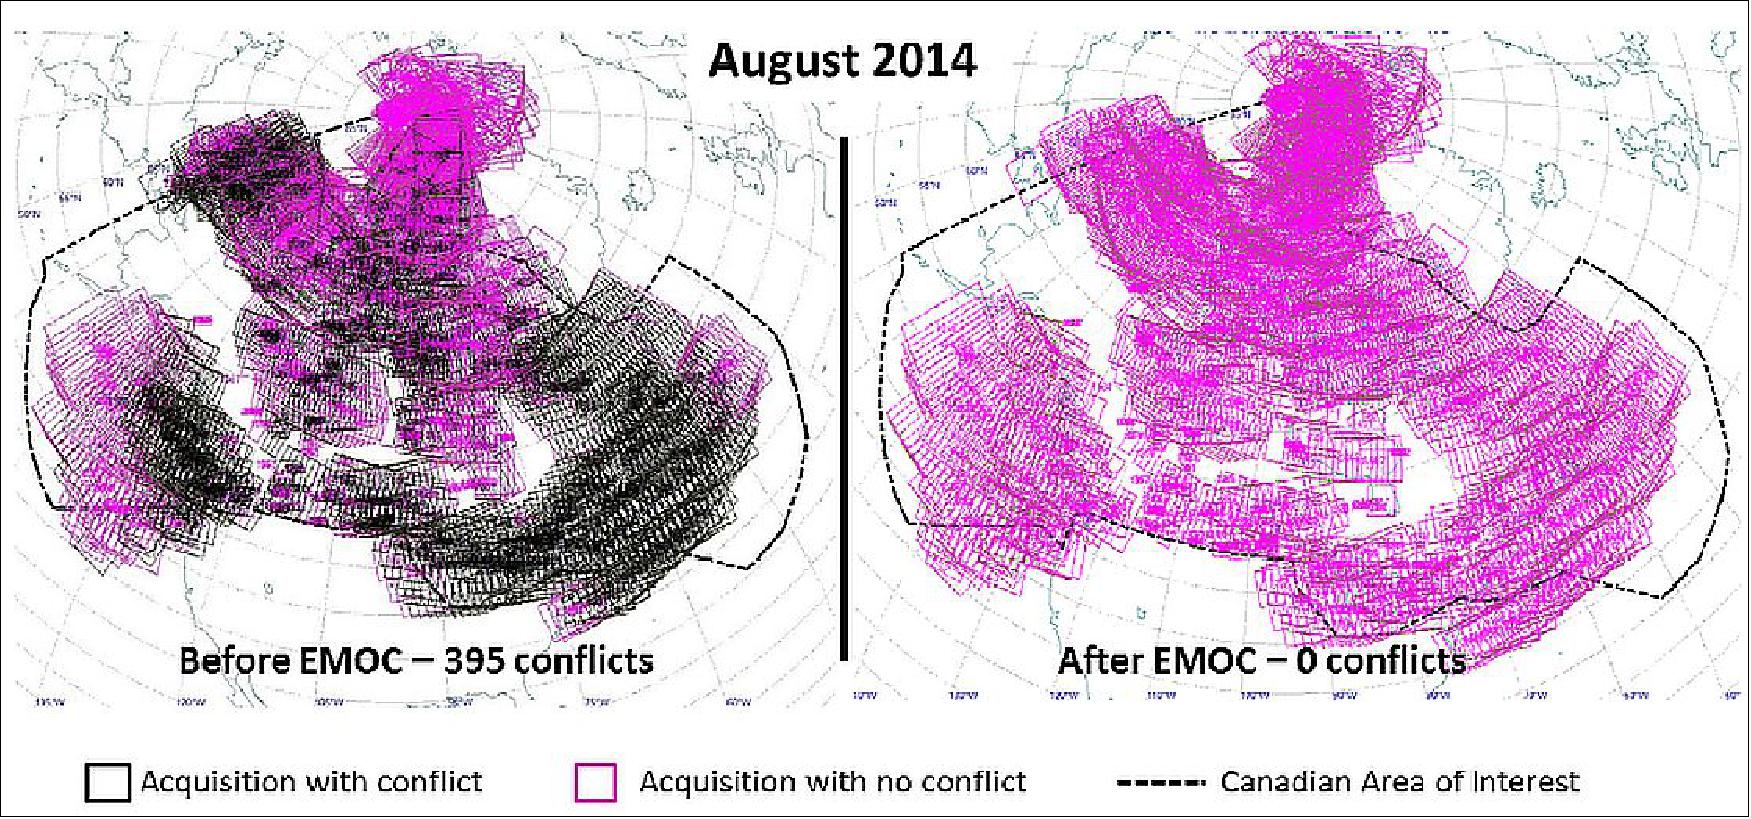 Figure 12: Results from the EMOC process for the month of August 2014 (image credit: CSA)